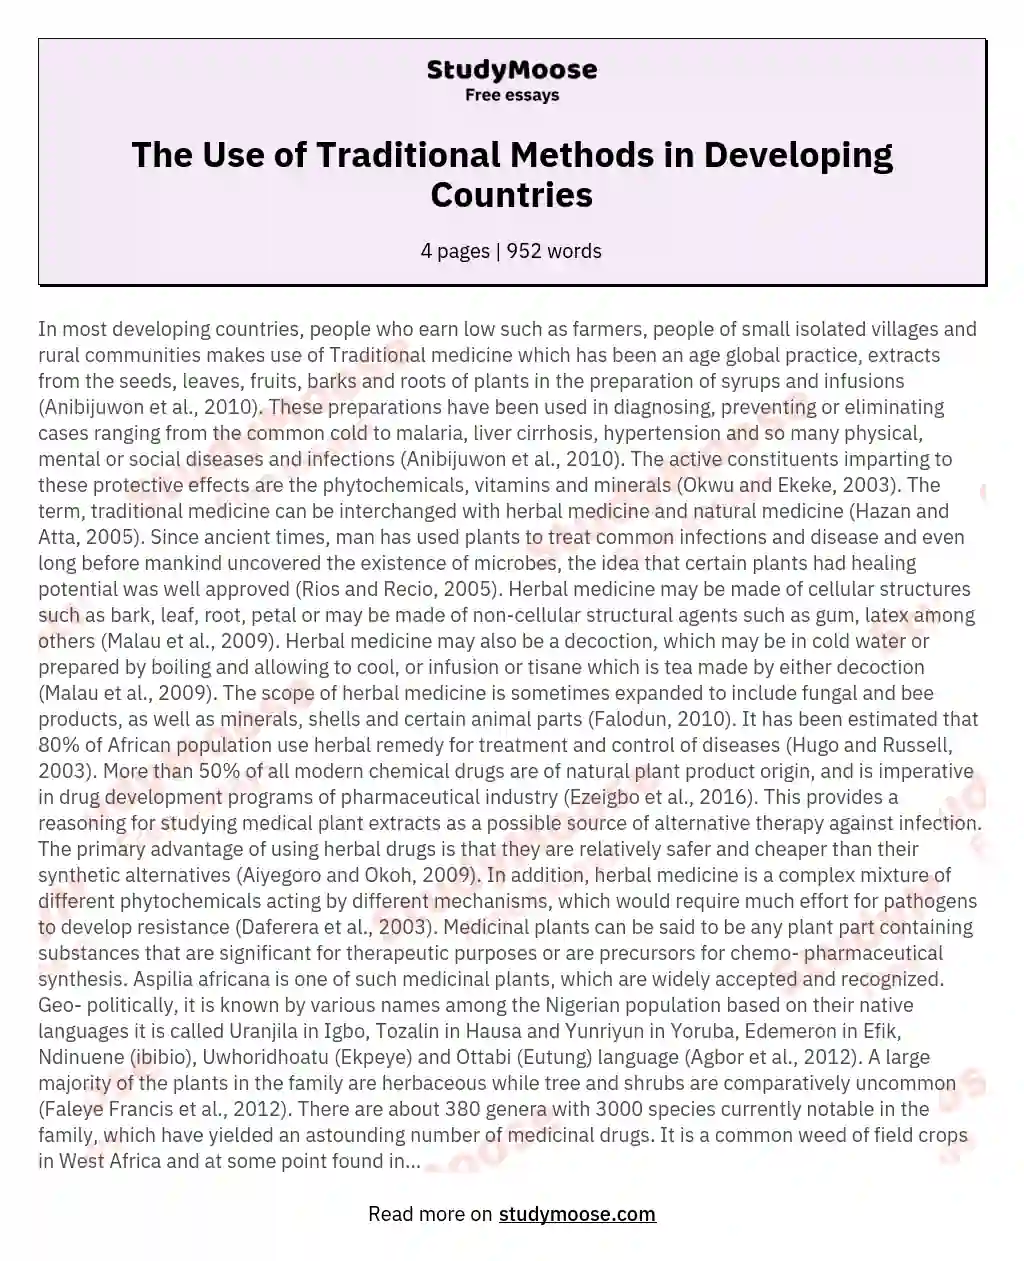 The Use of Traditional Methods in Developing Countries essay